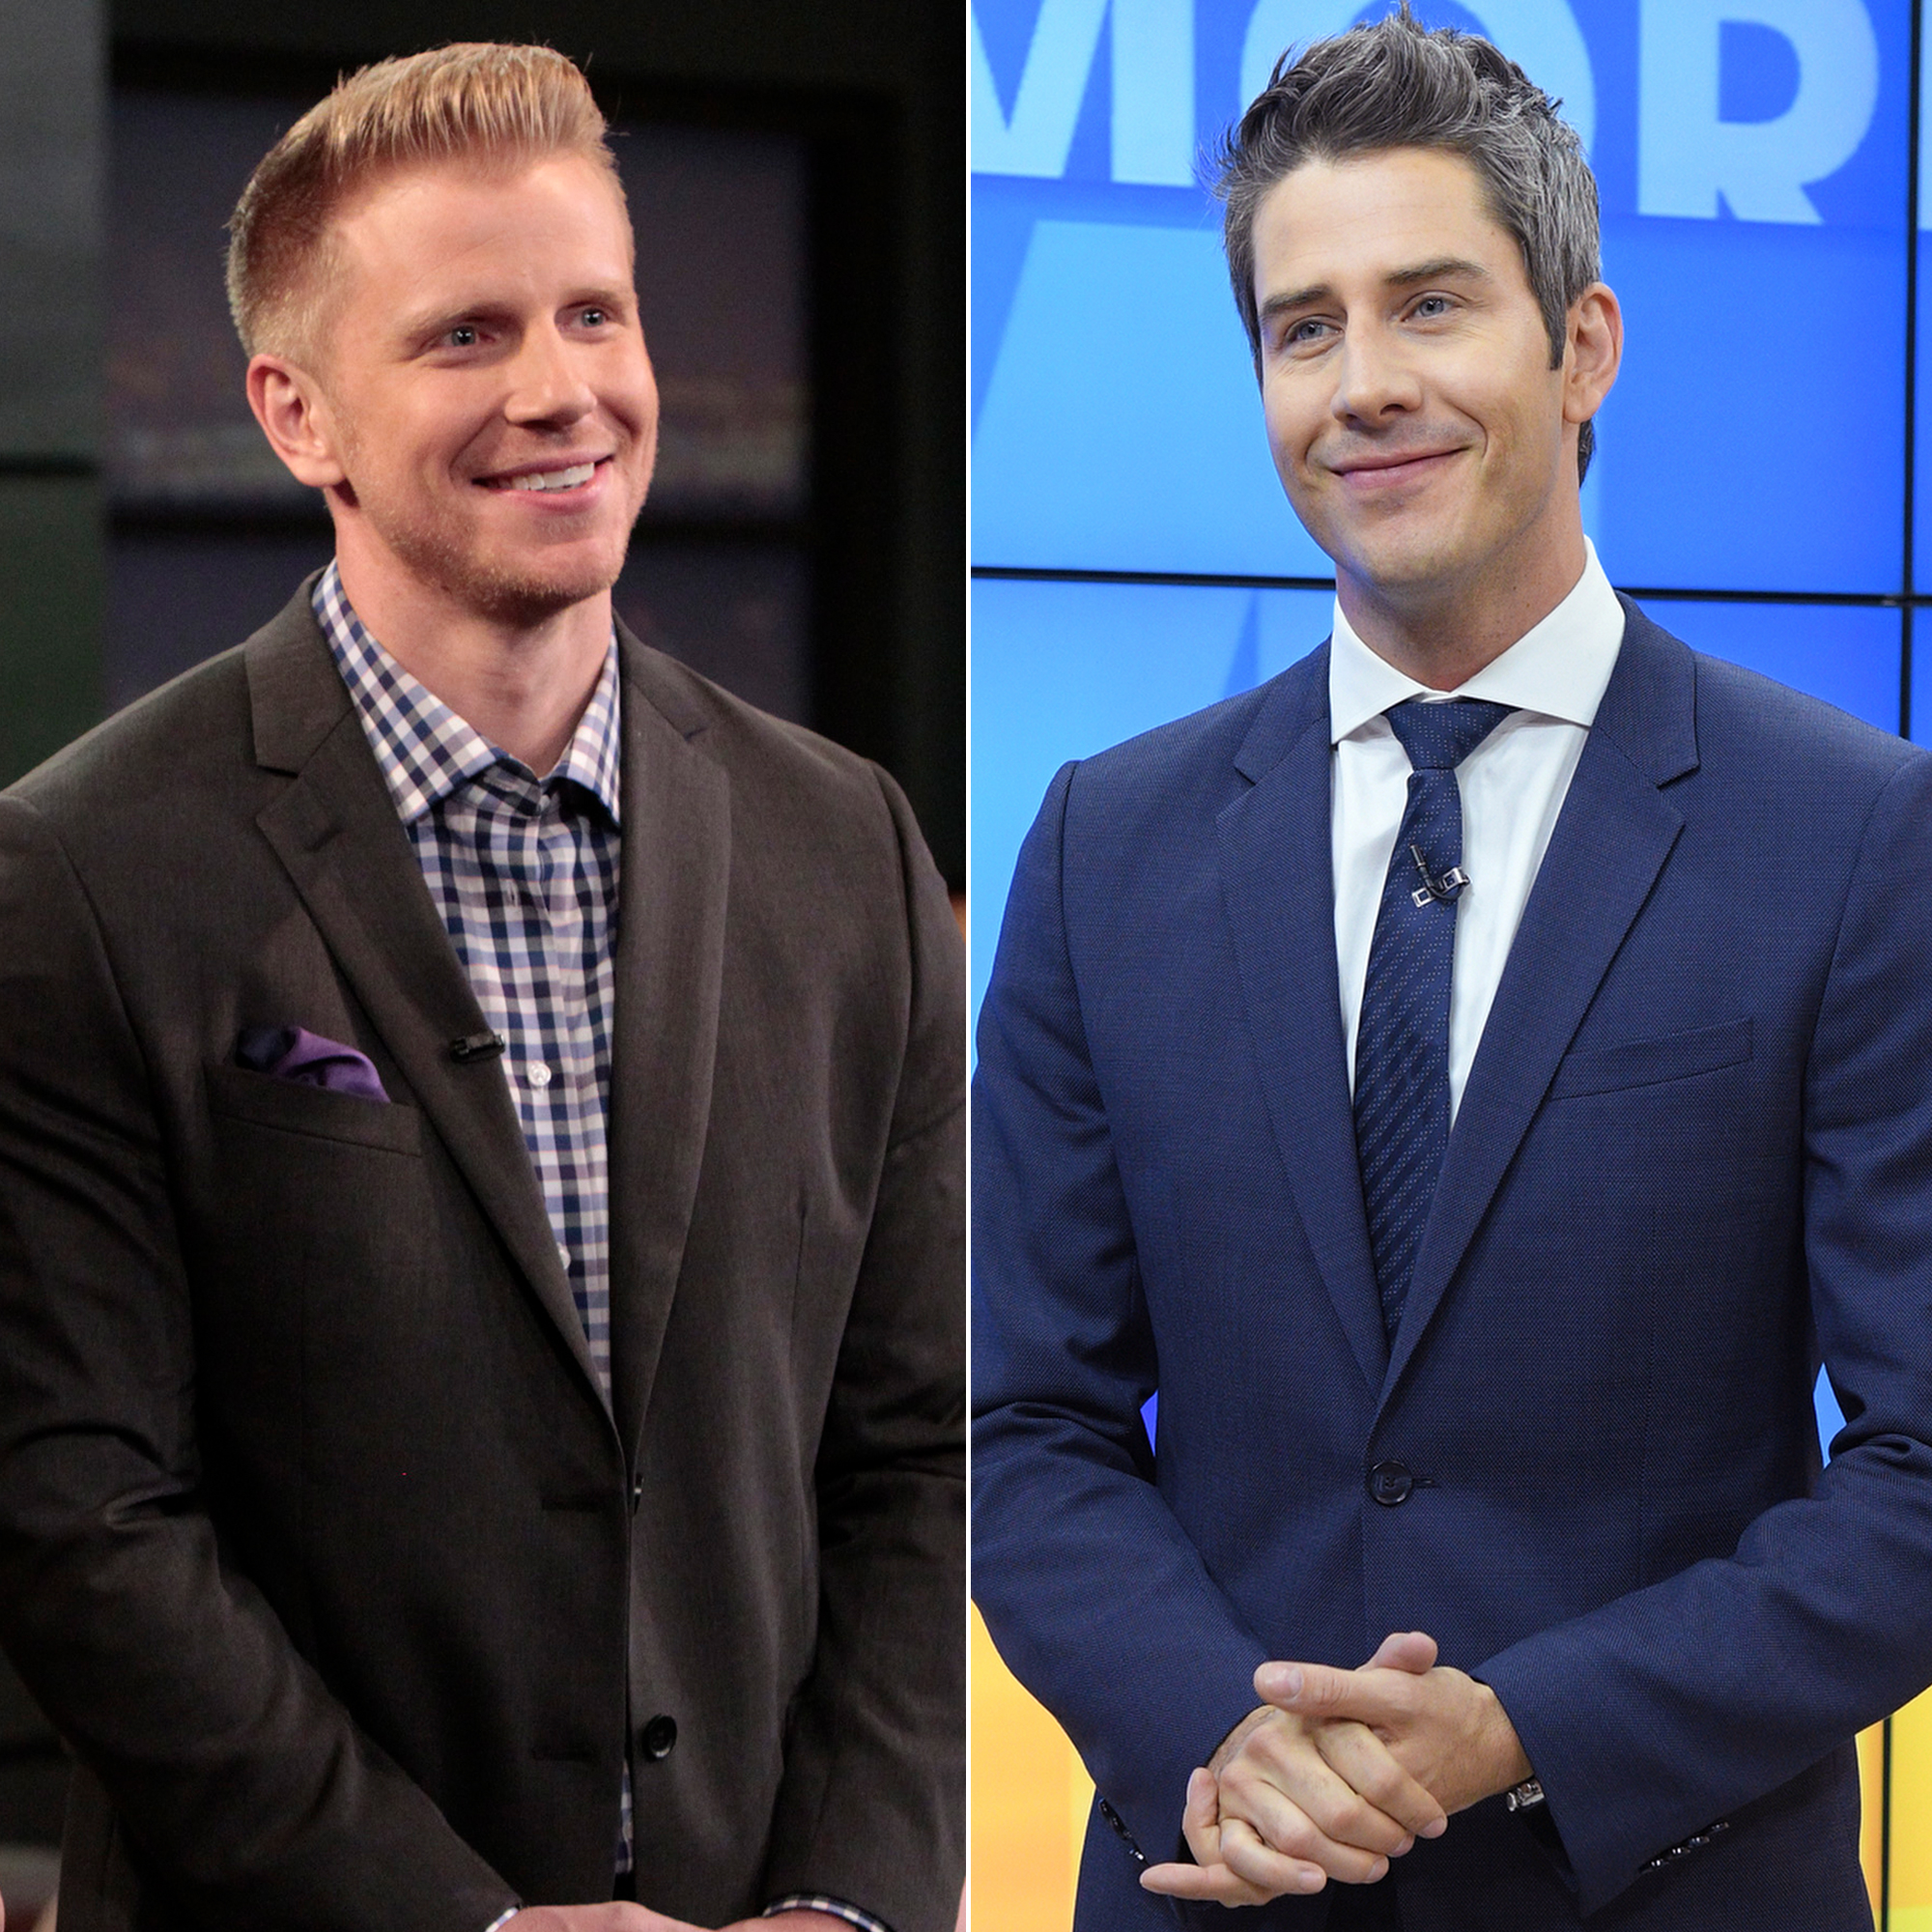 The Bachelor's Sean Lowe Says Arie Luyendyk Jr. 'Has Done a 180'